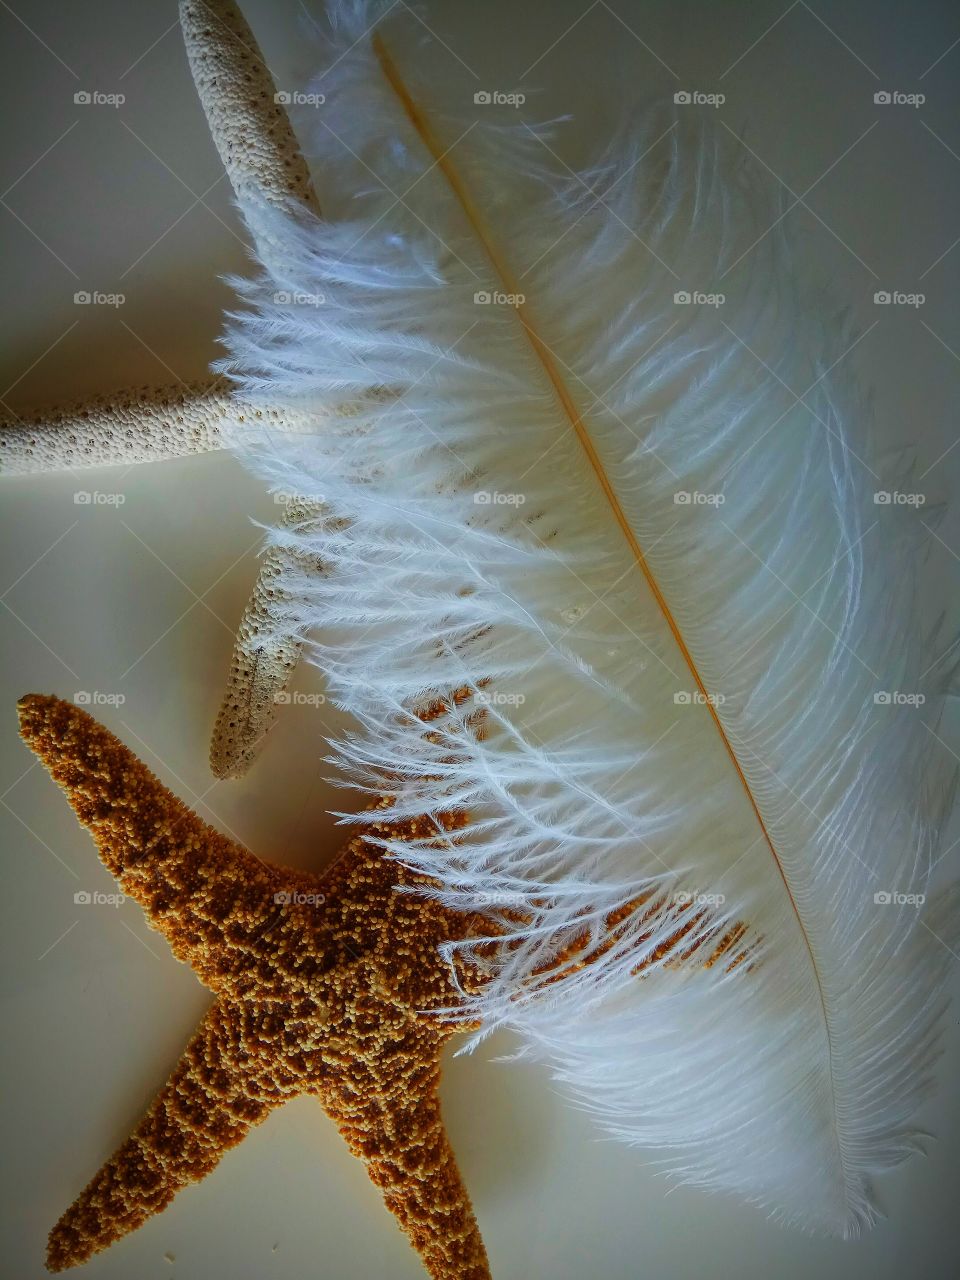 feather with star fish